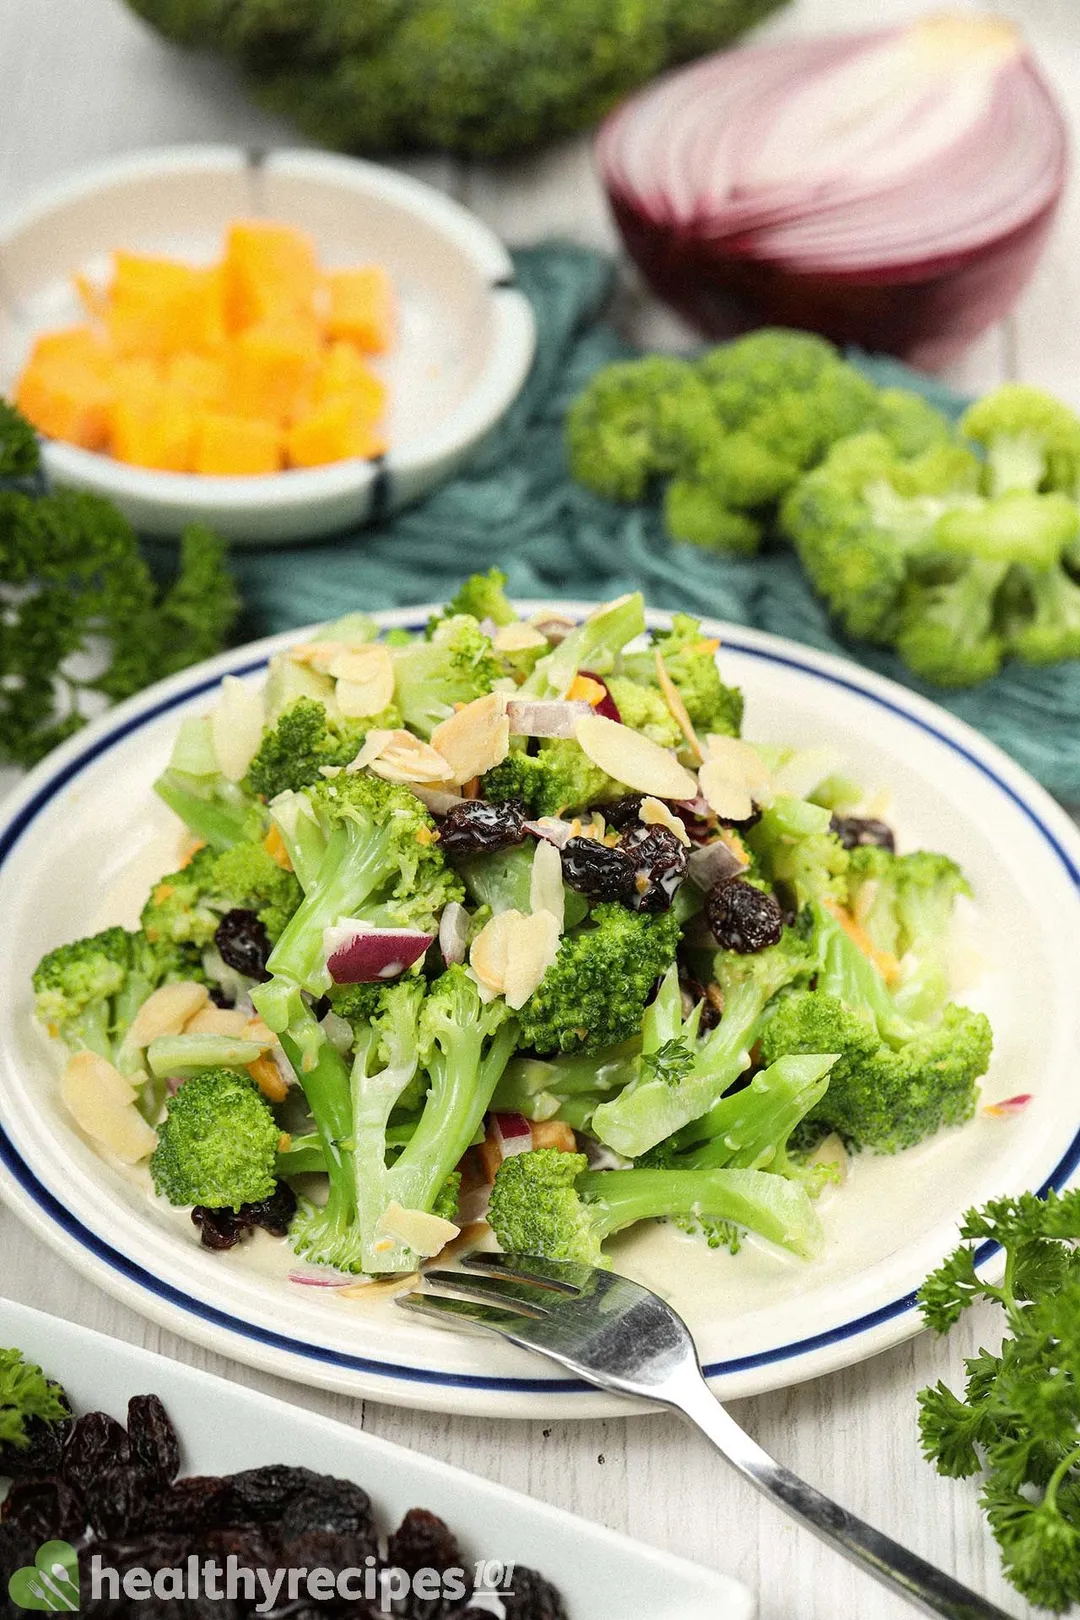 A white plate with blue rim with broccoli florets, raisins, sliced almonds, and a fork laid on it